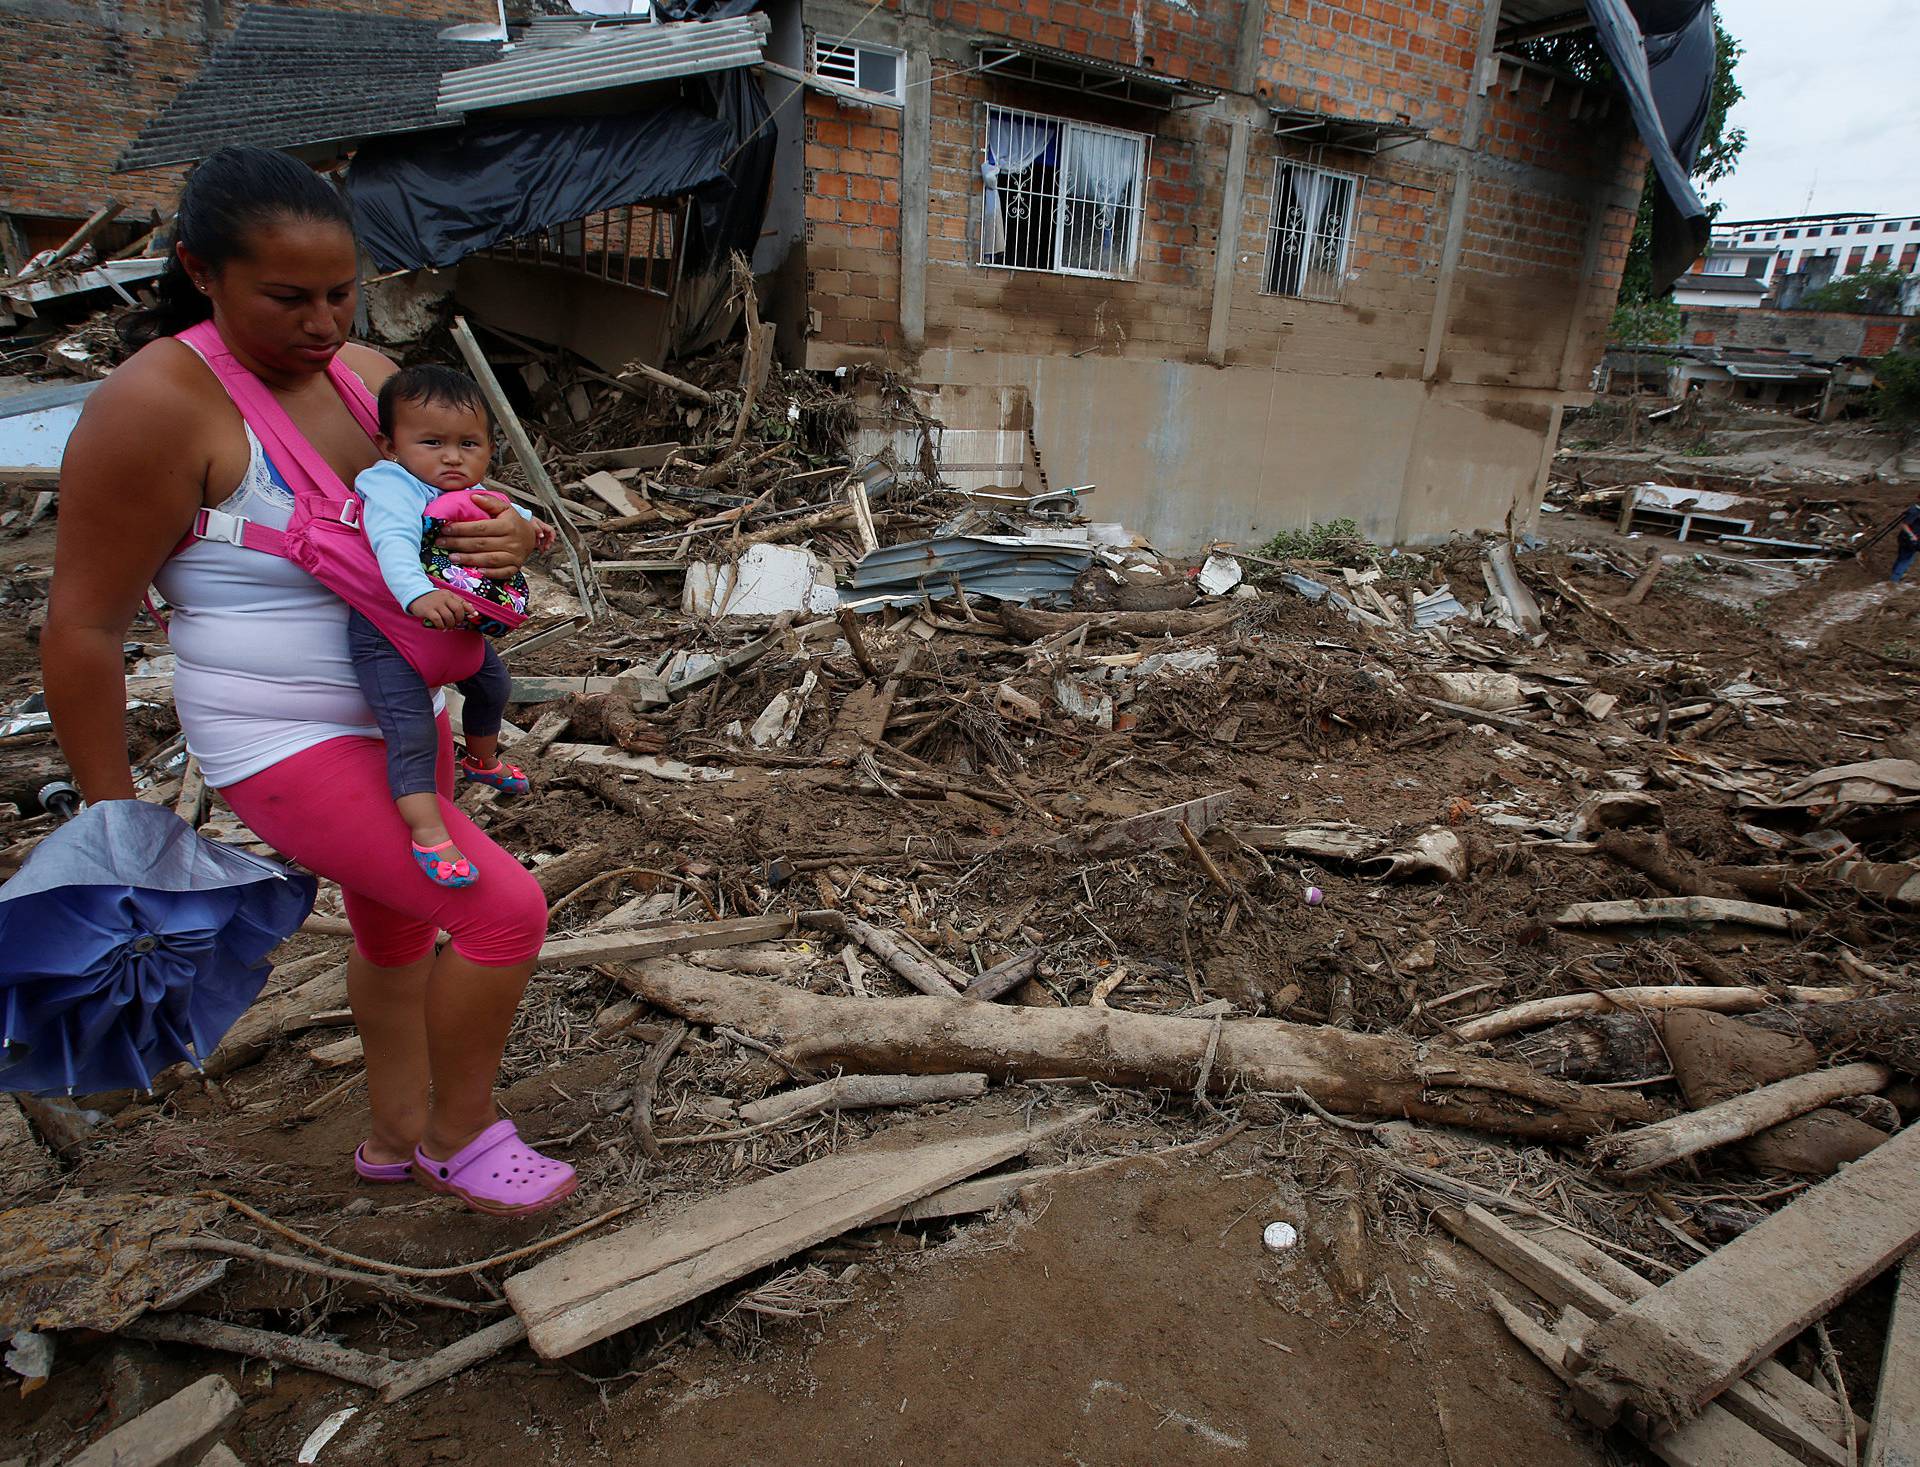 A woman walks with her daughter on a street destroyed after flooding and mudslides caused by heavy rains leading several rivers to overflow, pushing sediment and rocks into buildings and roads, in Mocoa